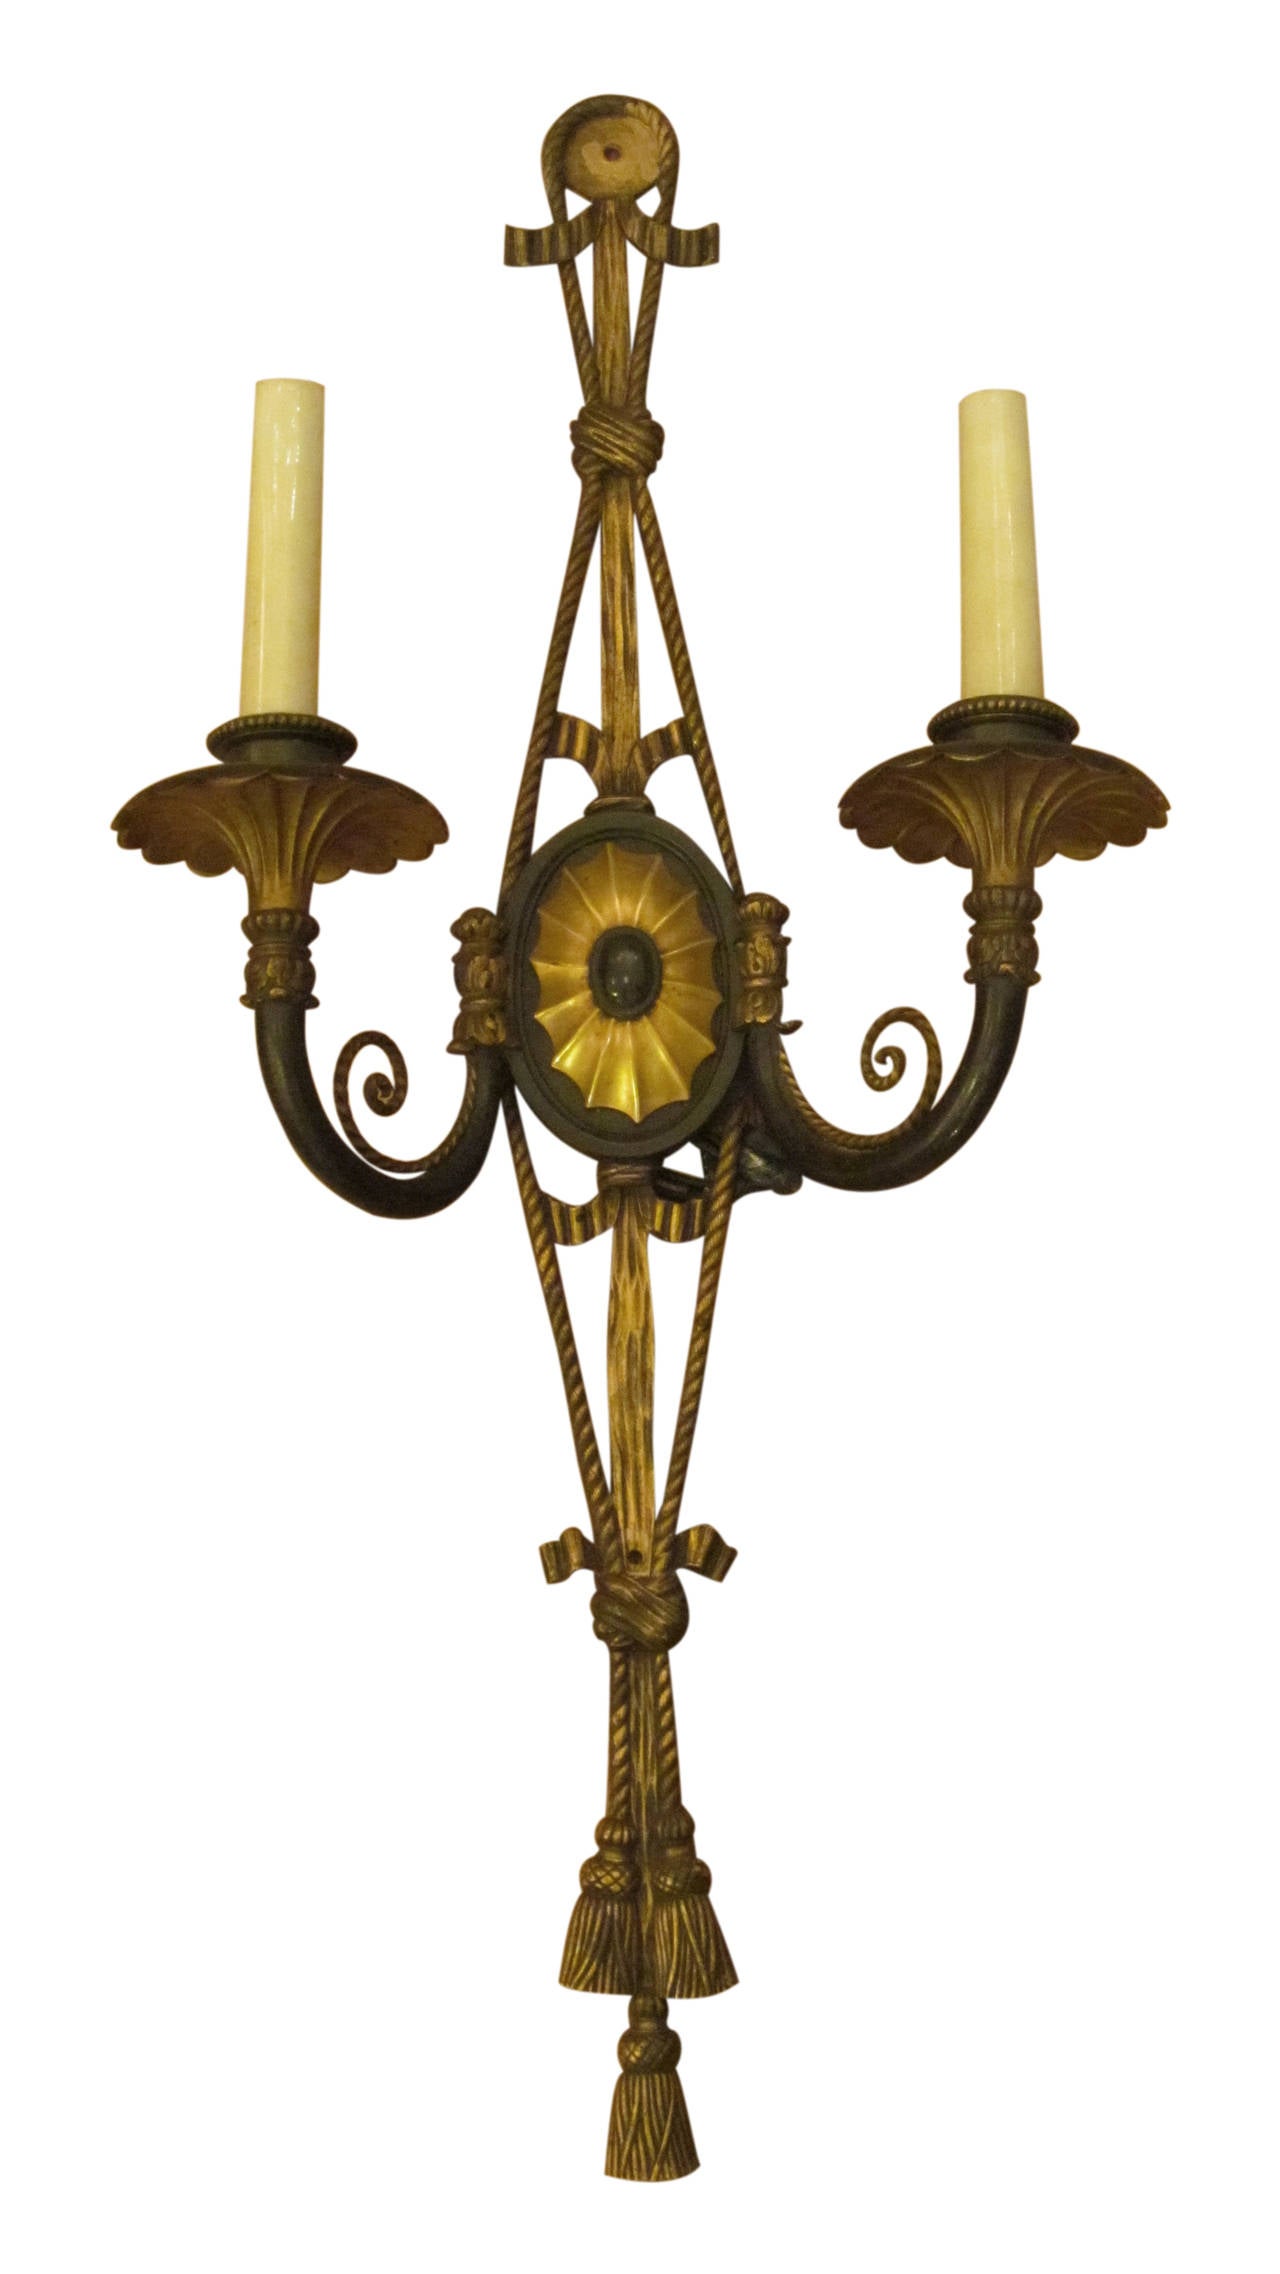 1920s Pair of Caldwell Bronze Sconces with Triple Tassels. Center spider web design. This can be seen at our 2420 Broadway location on the upper west side in Manhattan.